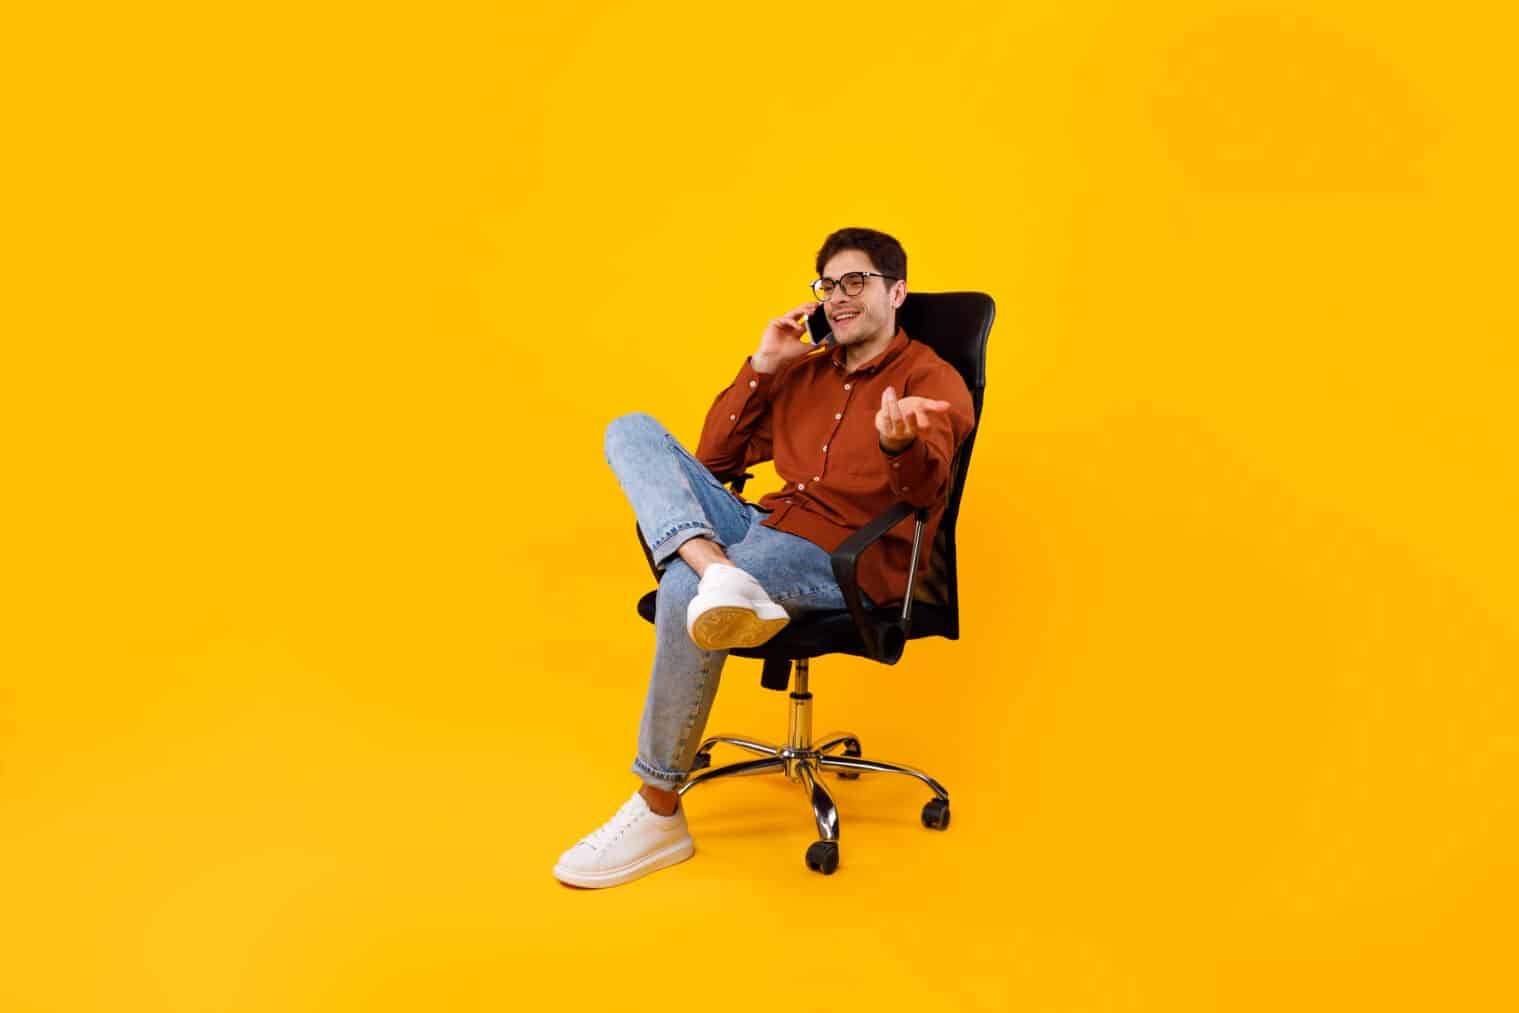 Business Man Talking On Phone Sitting In Chair Over Yellow Studio Background. Man Communicating Having Pleasant Cellphone Conversation. Modern Mobile Communication Concept. Full Length Shot